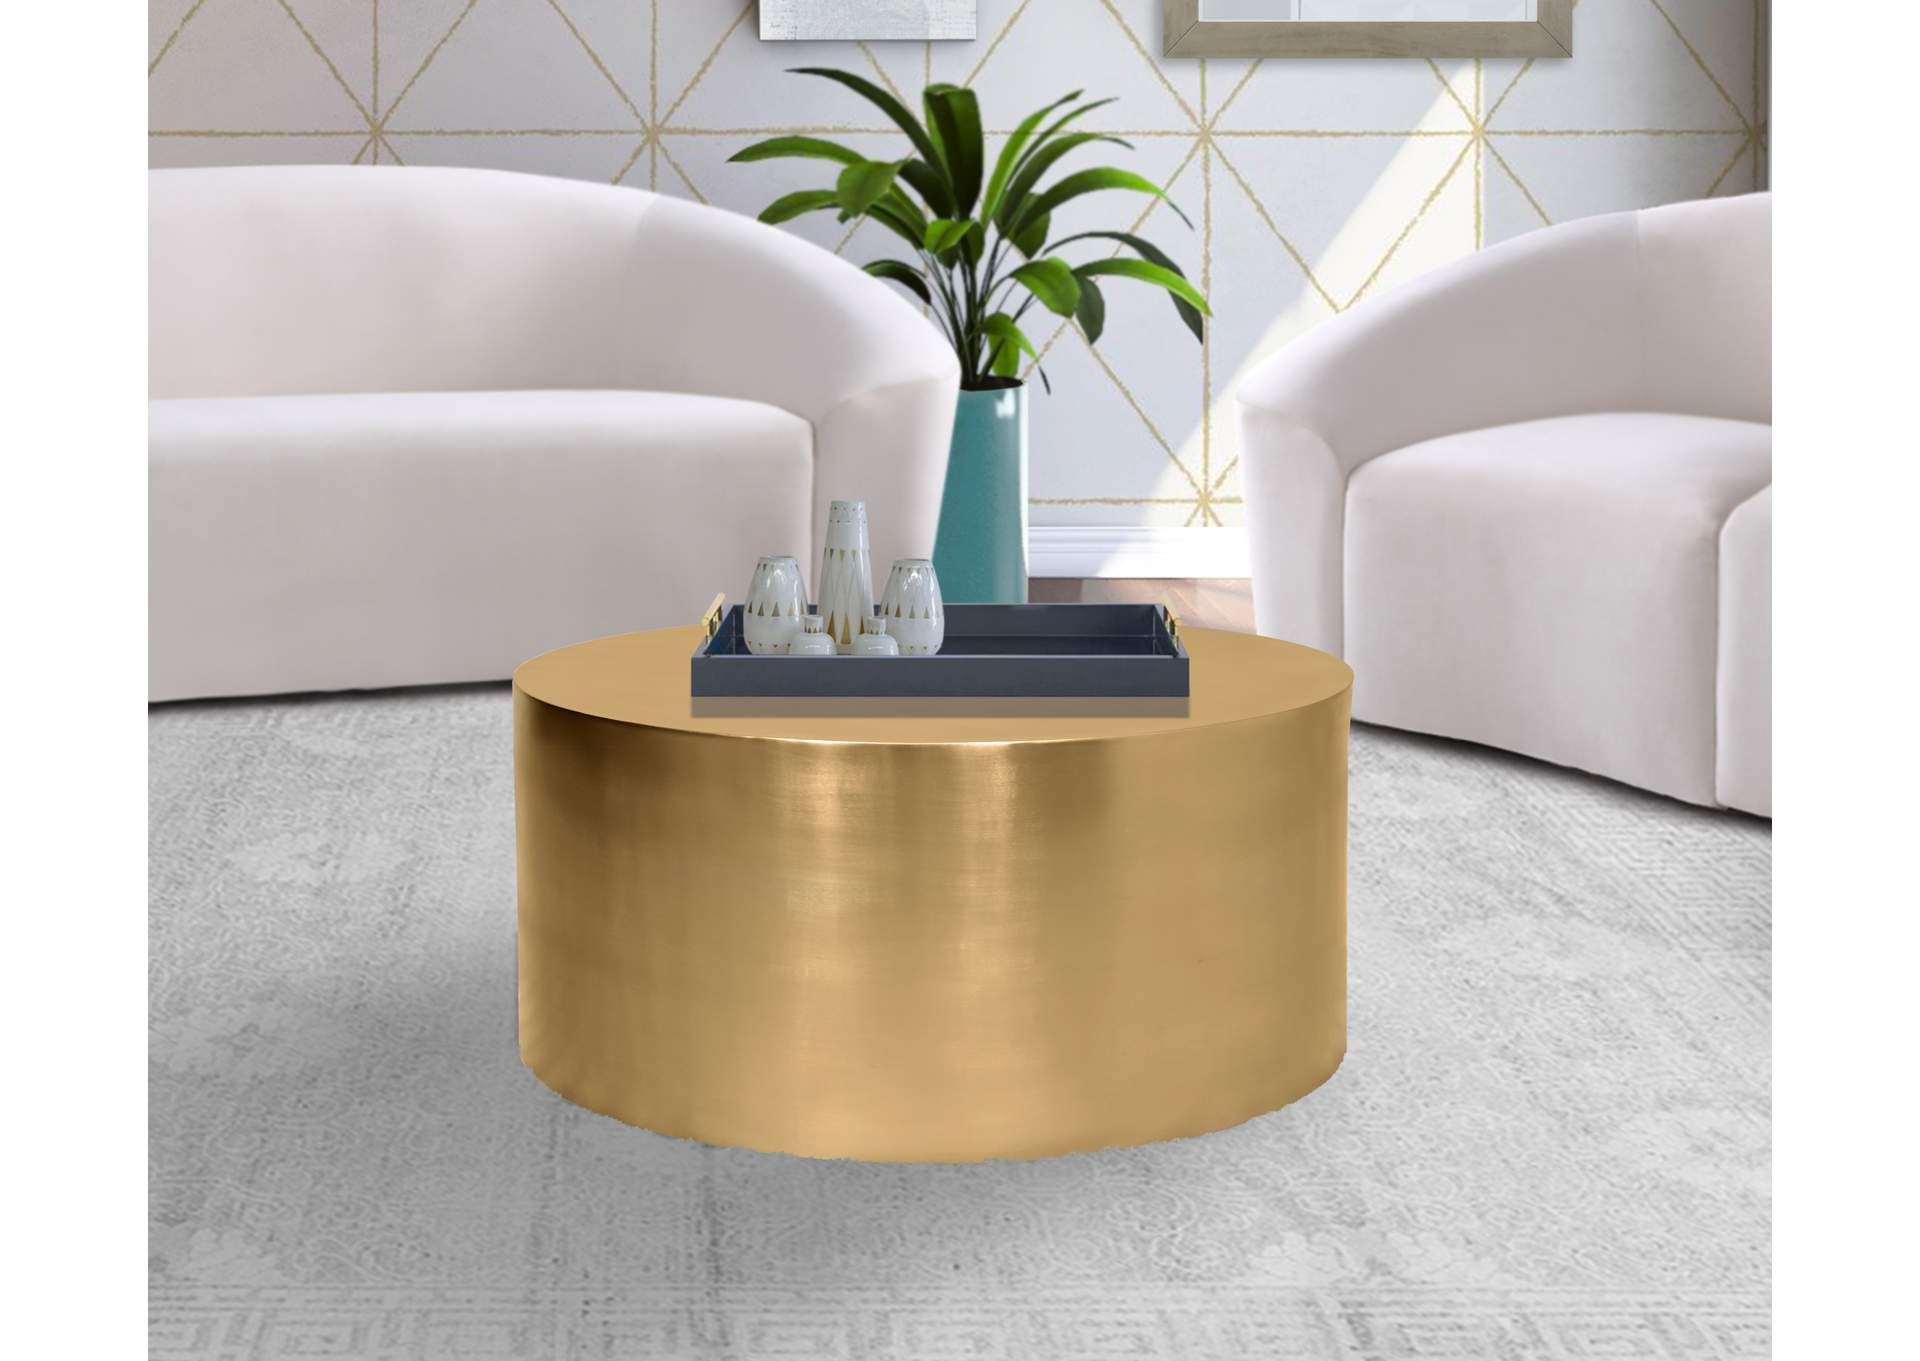 Cylinder Brushed Gold Coffee Table Harlem Furniture Throughout Well Known Satin Gold Coffee Tables (Gallery 20 of 20)